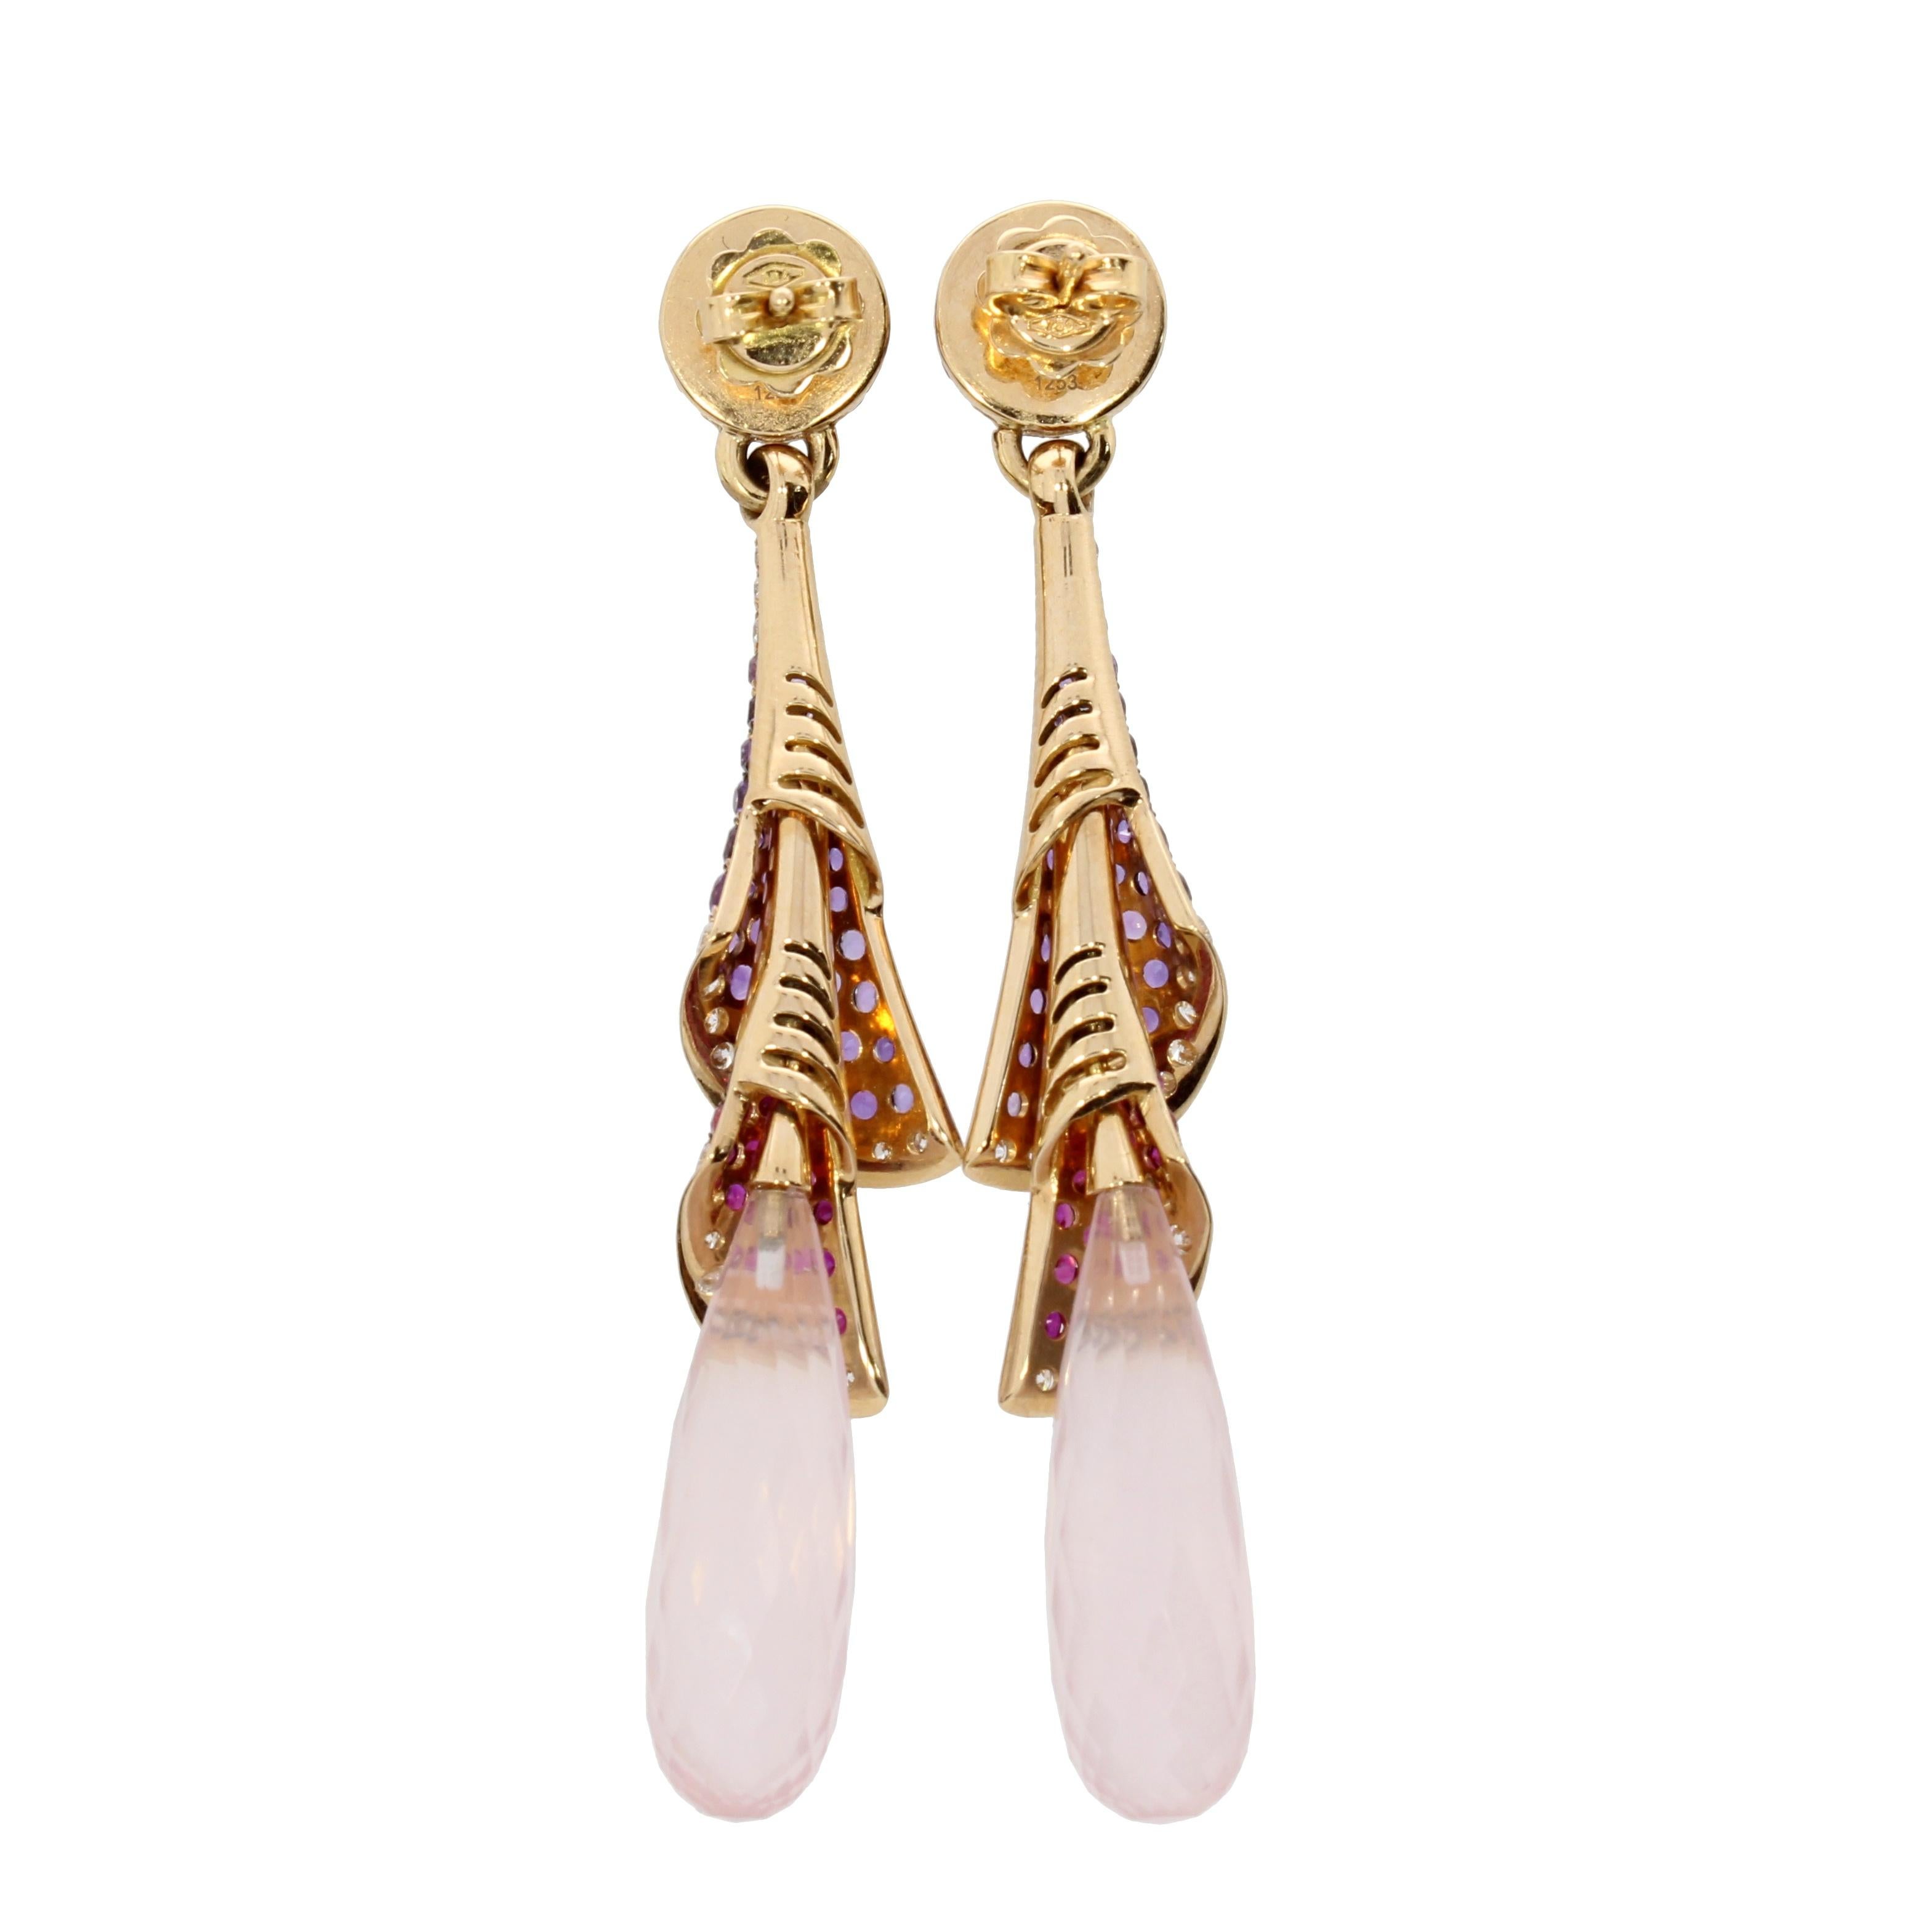 A pink quartz drop hangs gracefully beneath delicate frills of rubies, amethyst and brilliant cut diamonds, to form this elegant and classic silhouette.

Details
Venice Pink Quartz Ruby Amethyst and Diamond Drop Earrings
- 18 karat Rose Gold
- 20.72